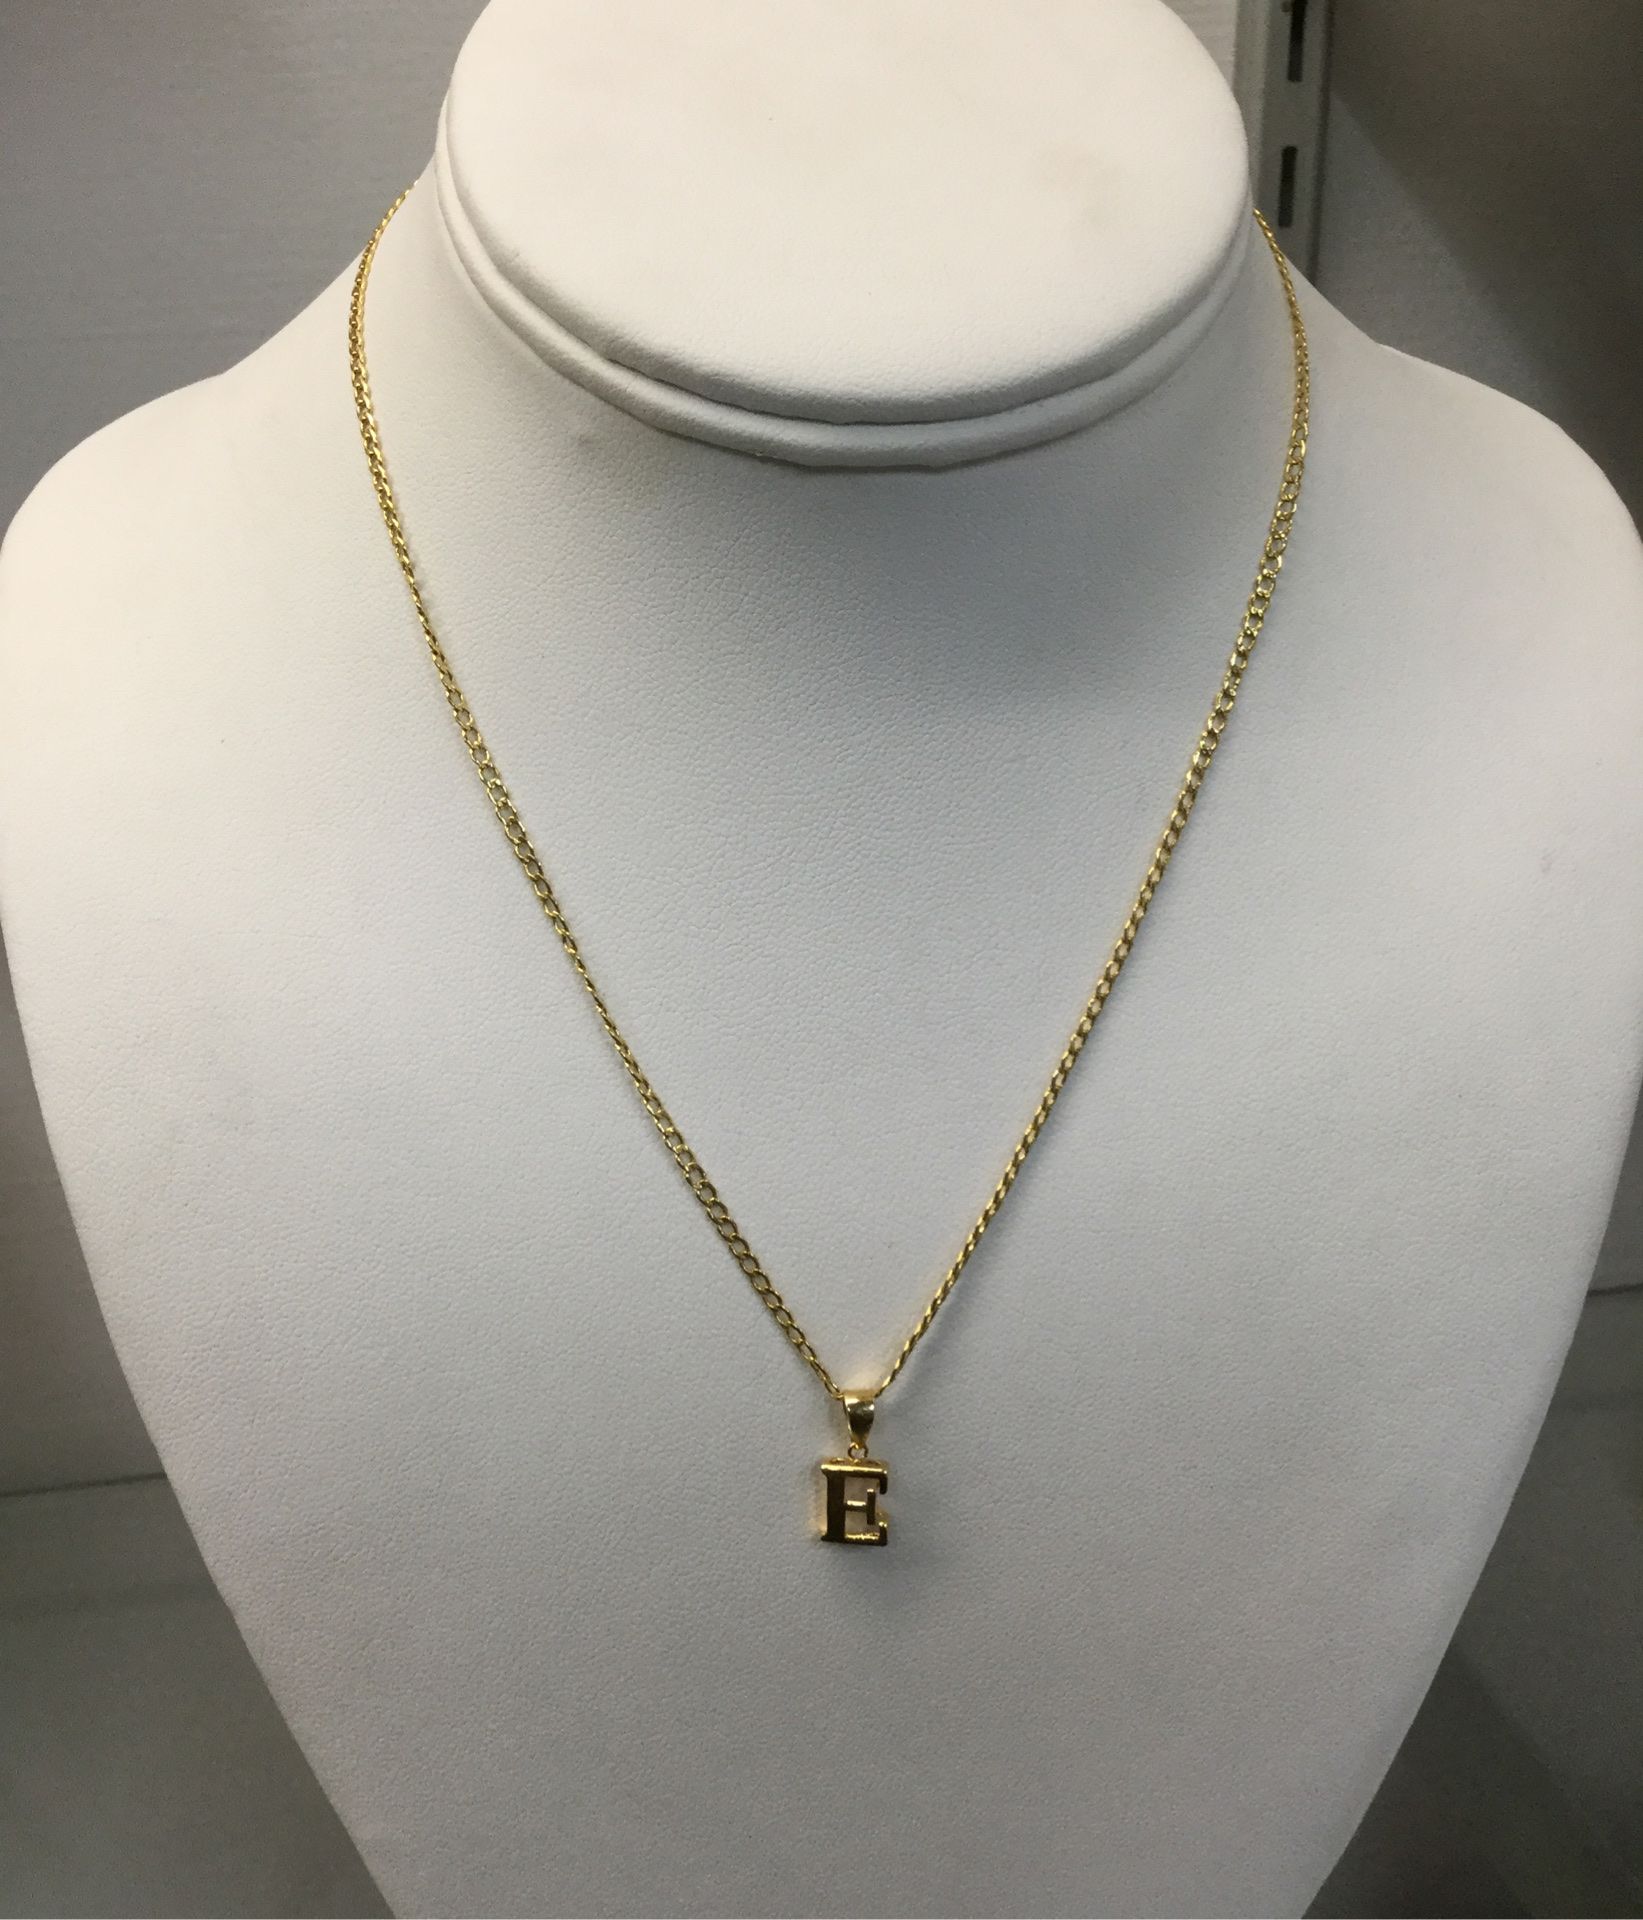 18k Yellow Gold Chain with Initial “E” Pendent